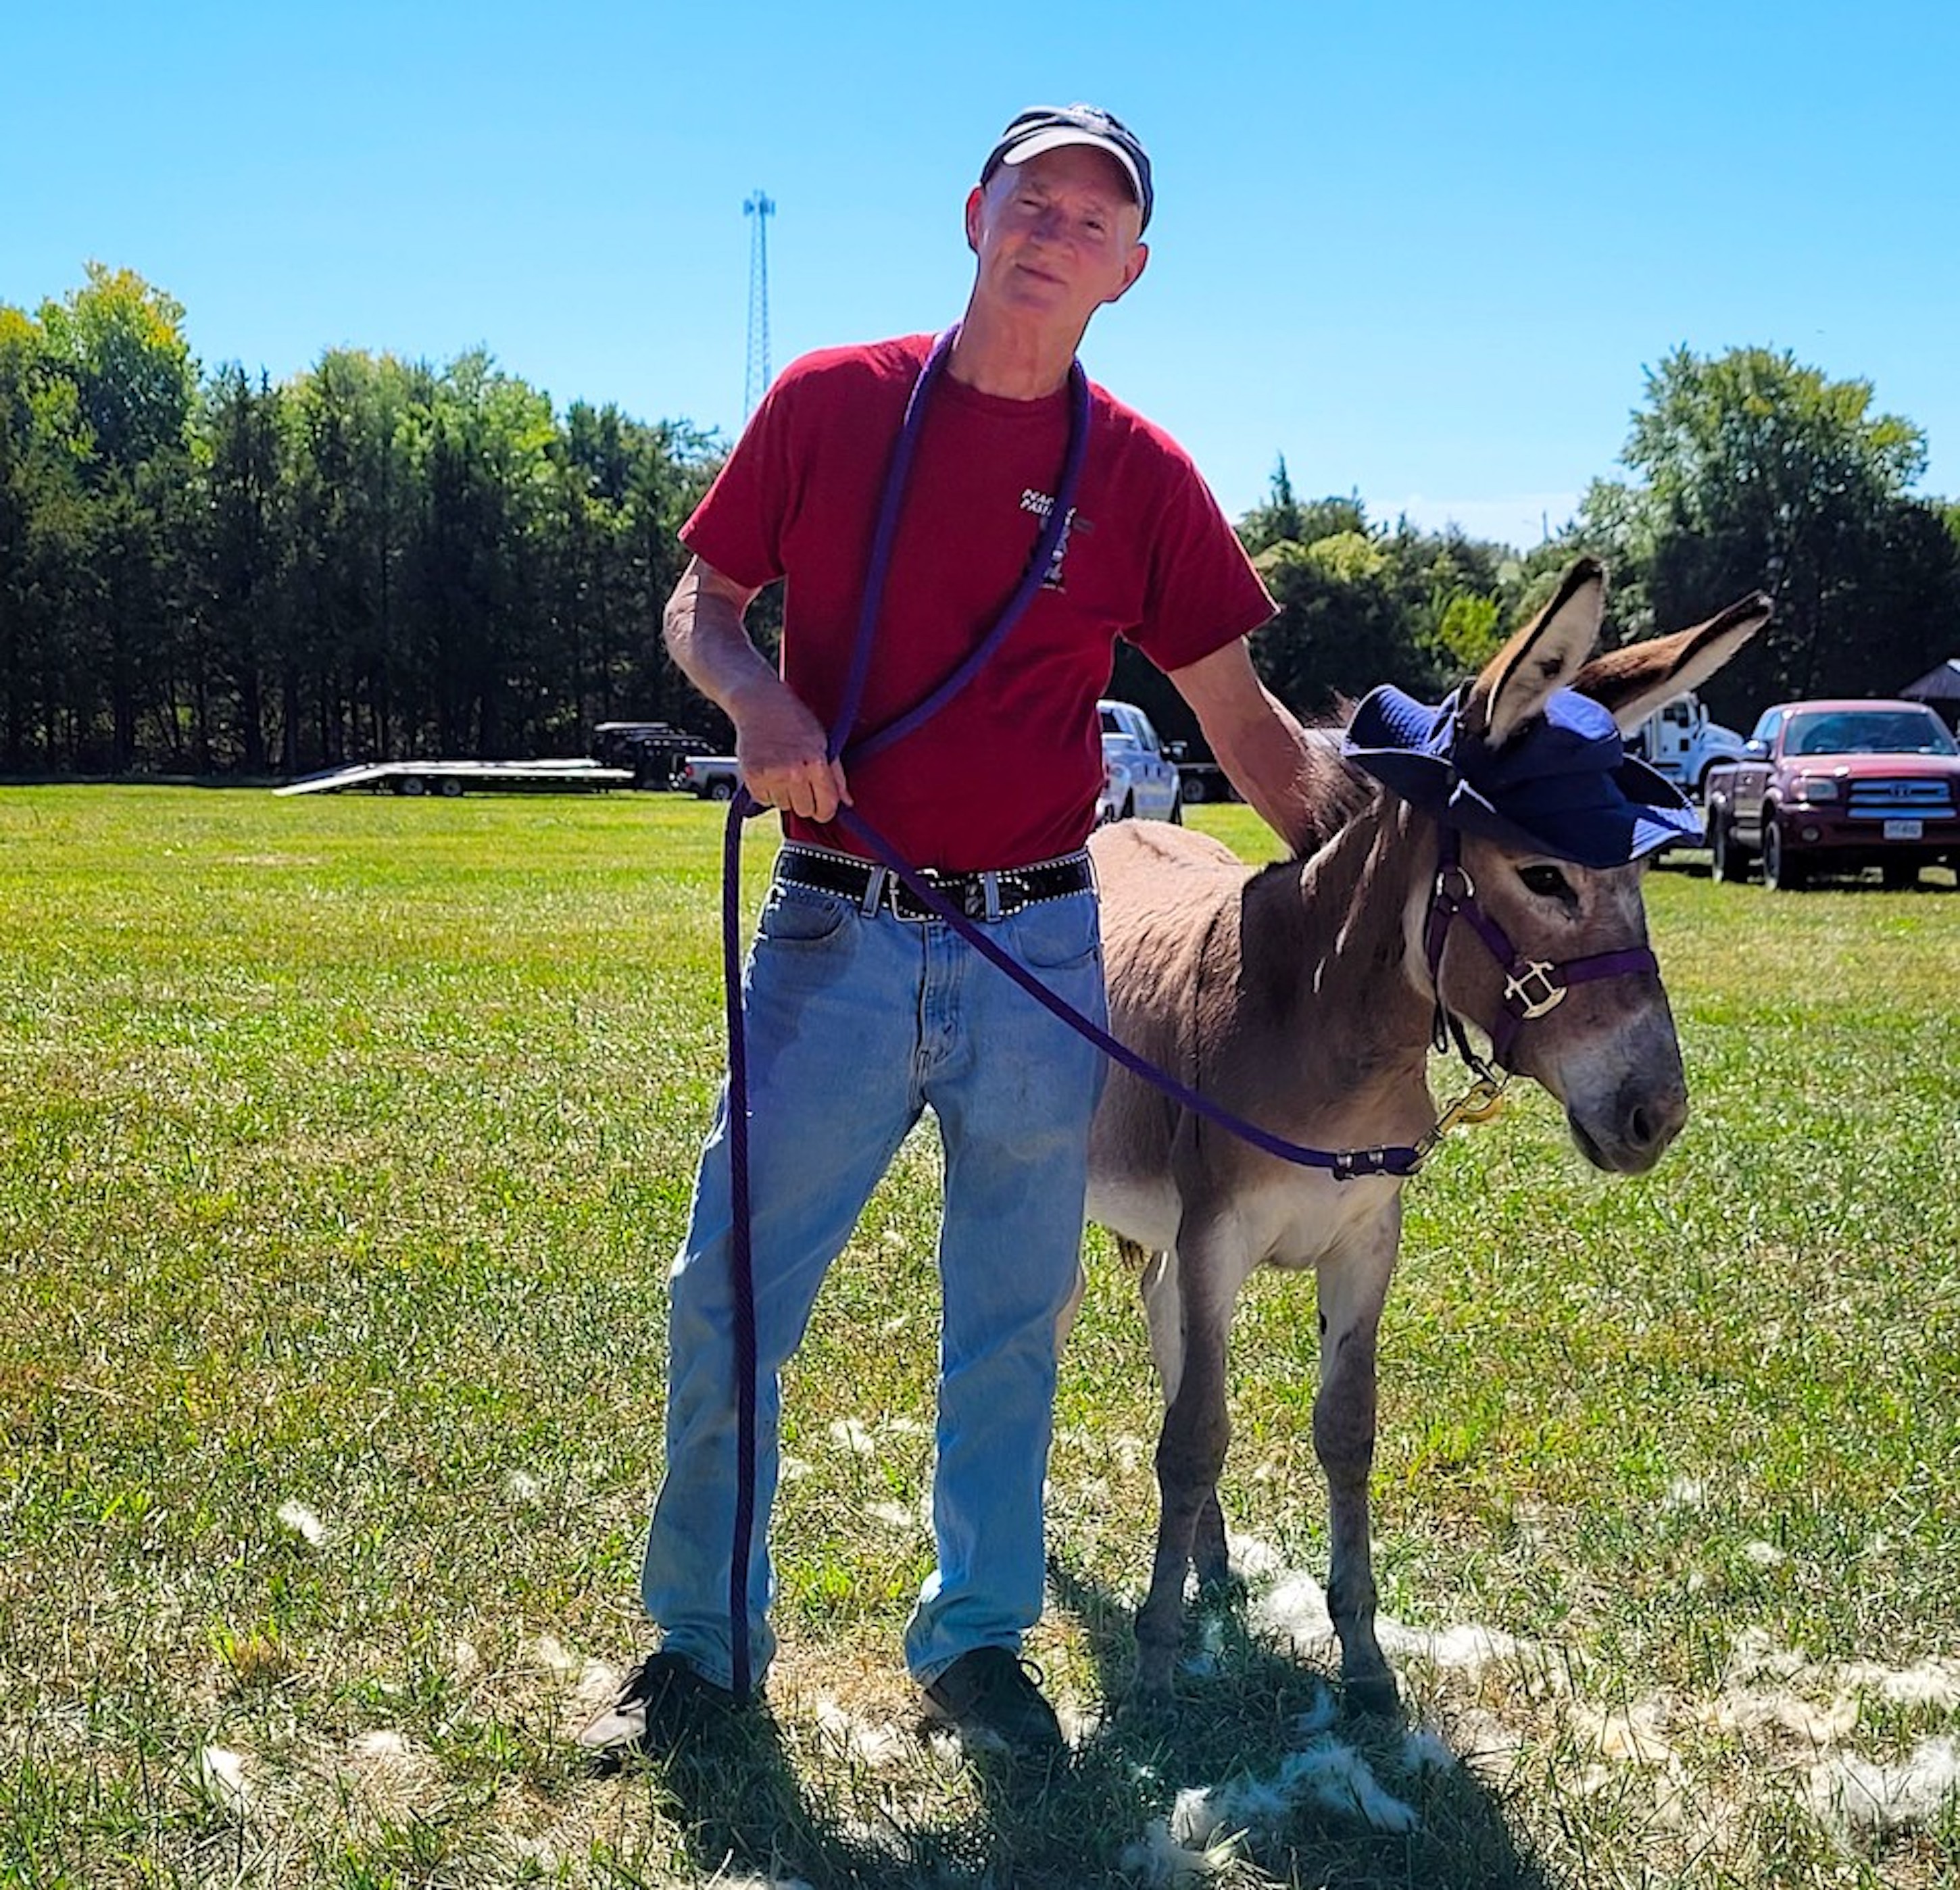 Open In addition to tending bees, U.S. Army veteran Eric Work is on the advisory board of Peaceful Pastures Donkey Rescue, a Missouri nonprofit that rescues donkeys that are abused, neglected or at risk of slaughter. Photo courtesy of Eric Work.